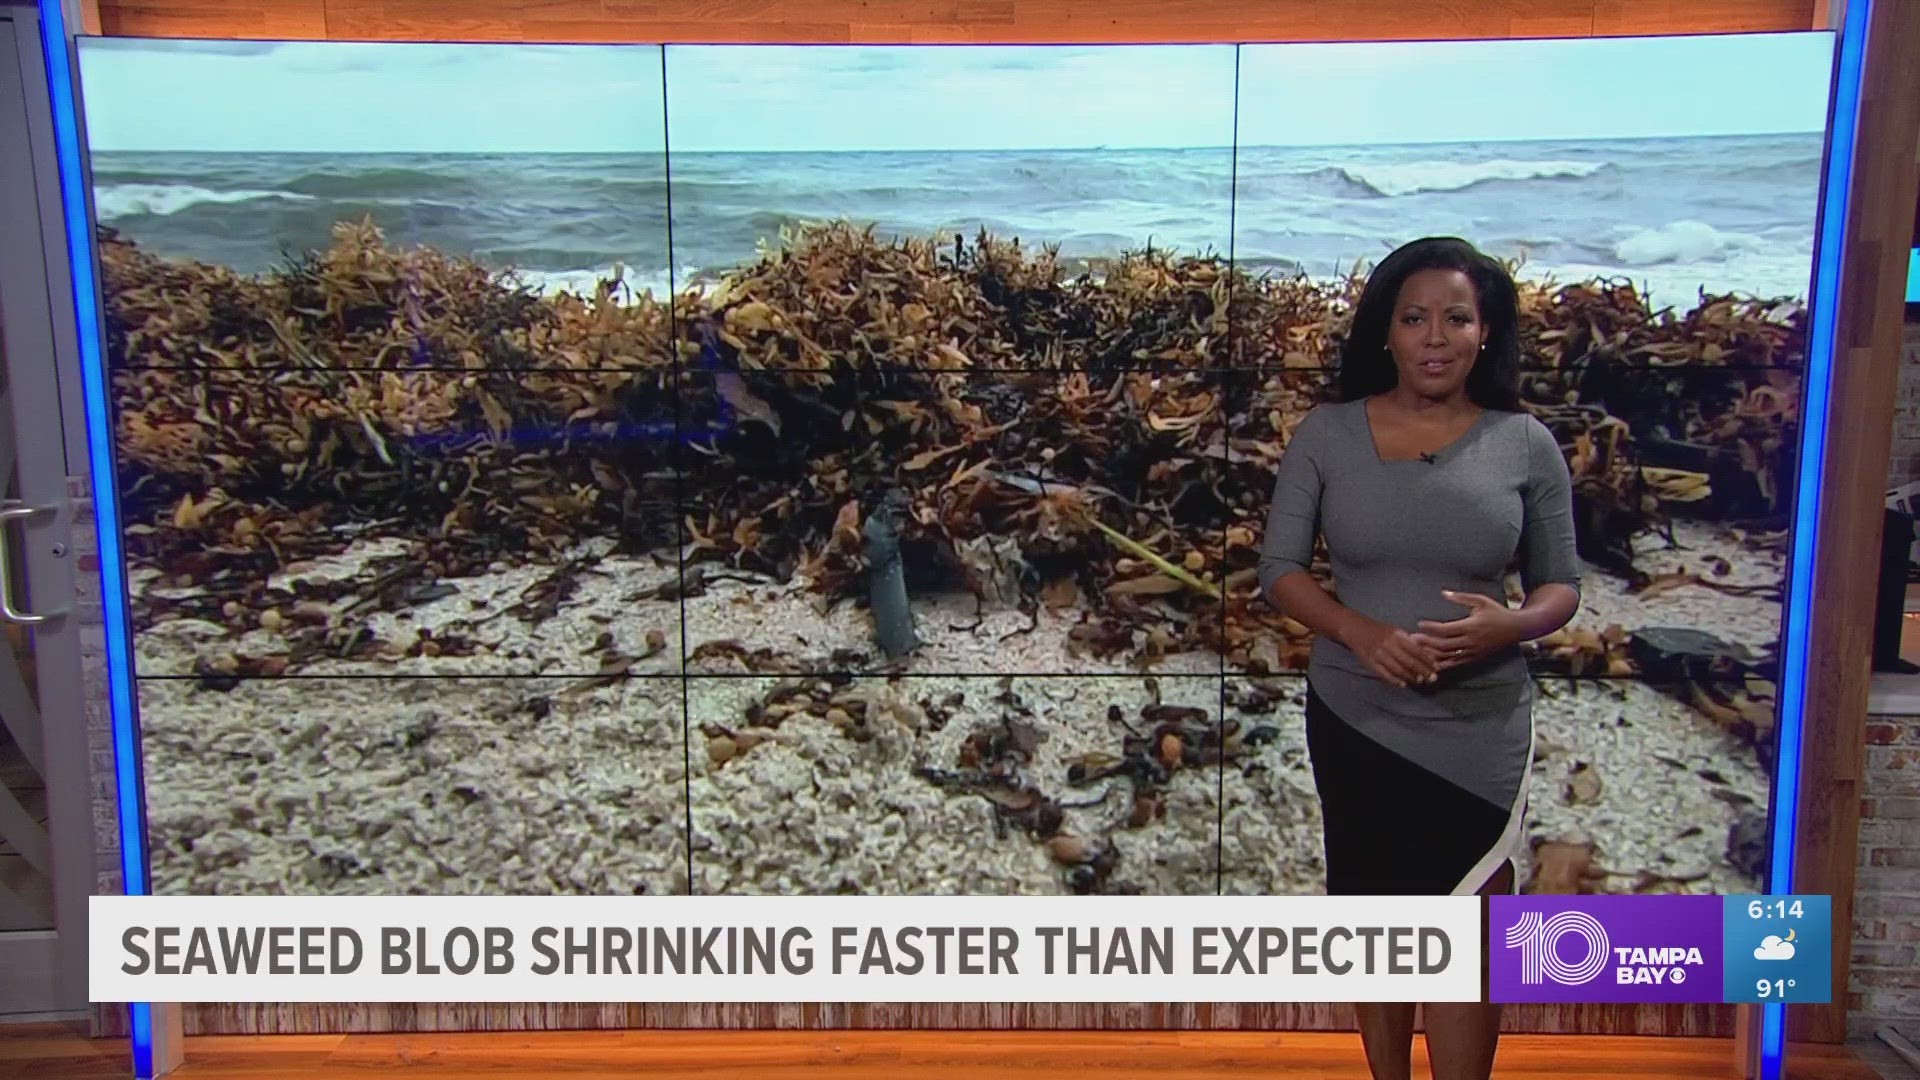 Researchers from the University of South Florida said the seaweed blob shrunk "beyond expectation" in June.